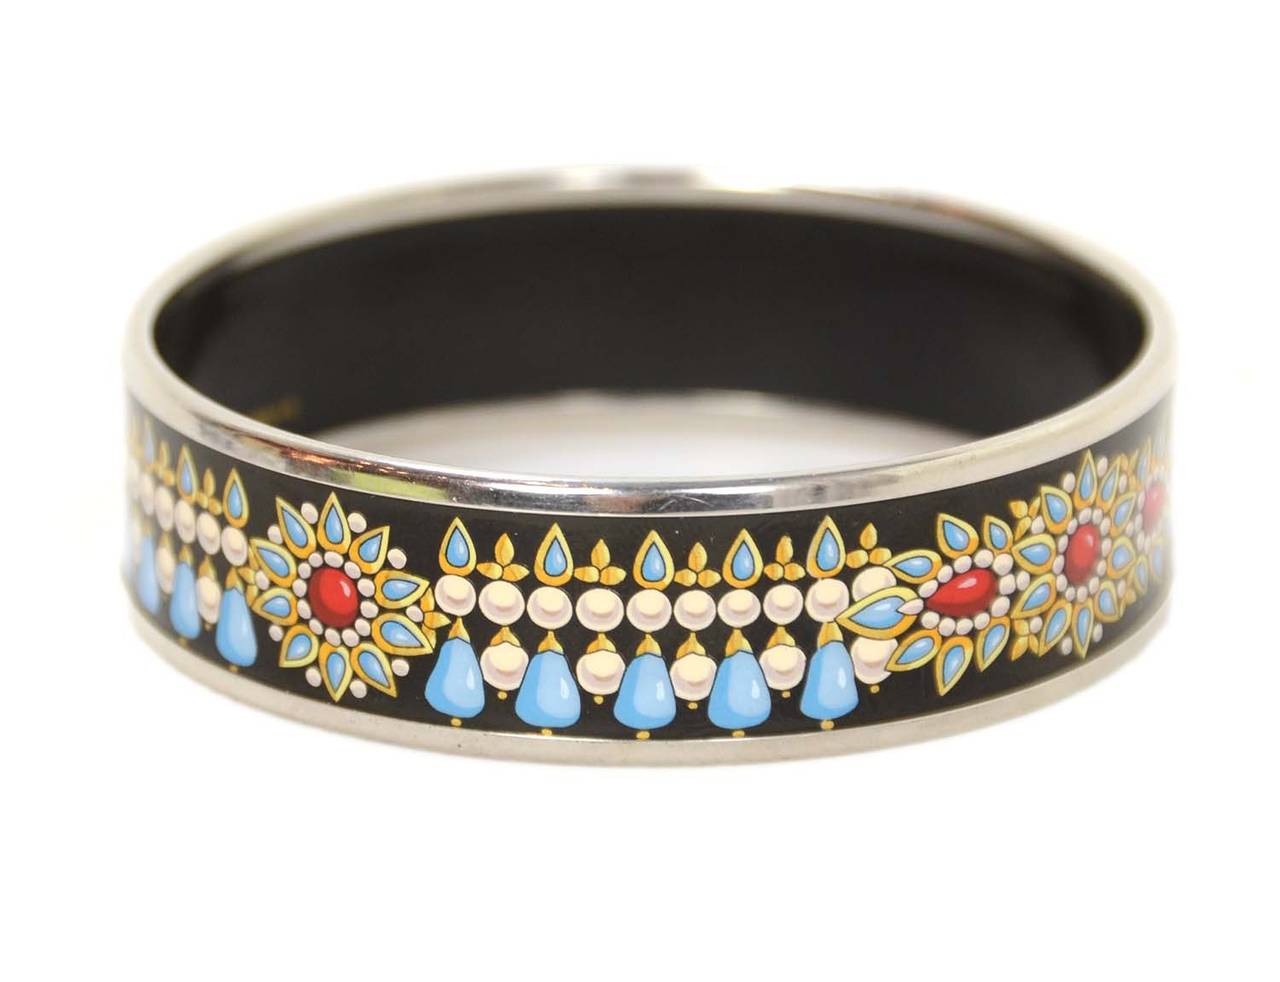 HERMES Black Enamel Bangle W/Blue and White Designs RT $635

    Made in: Austria
    Stamp: K
    Closure: Slips on over hand
    Color: Black, blue, and white
    Materials: Enamel Palladium
    Overall Condition: Excellent condition, some